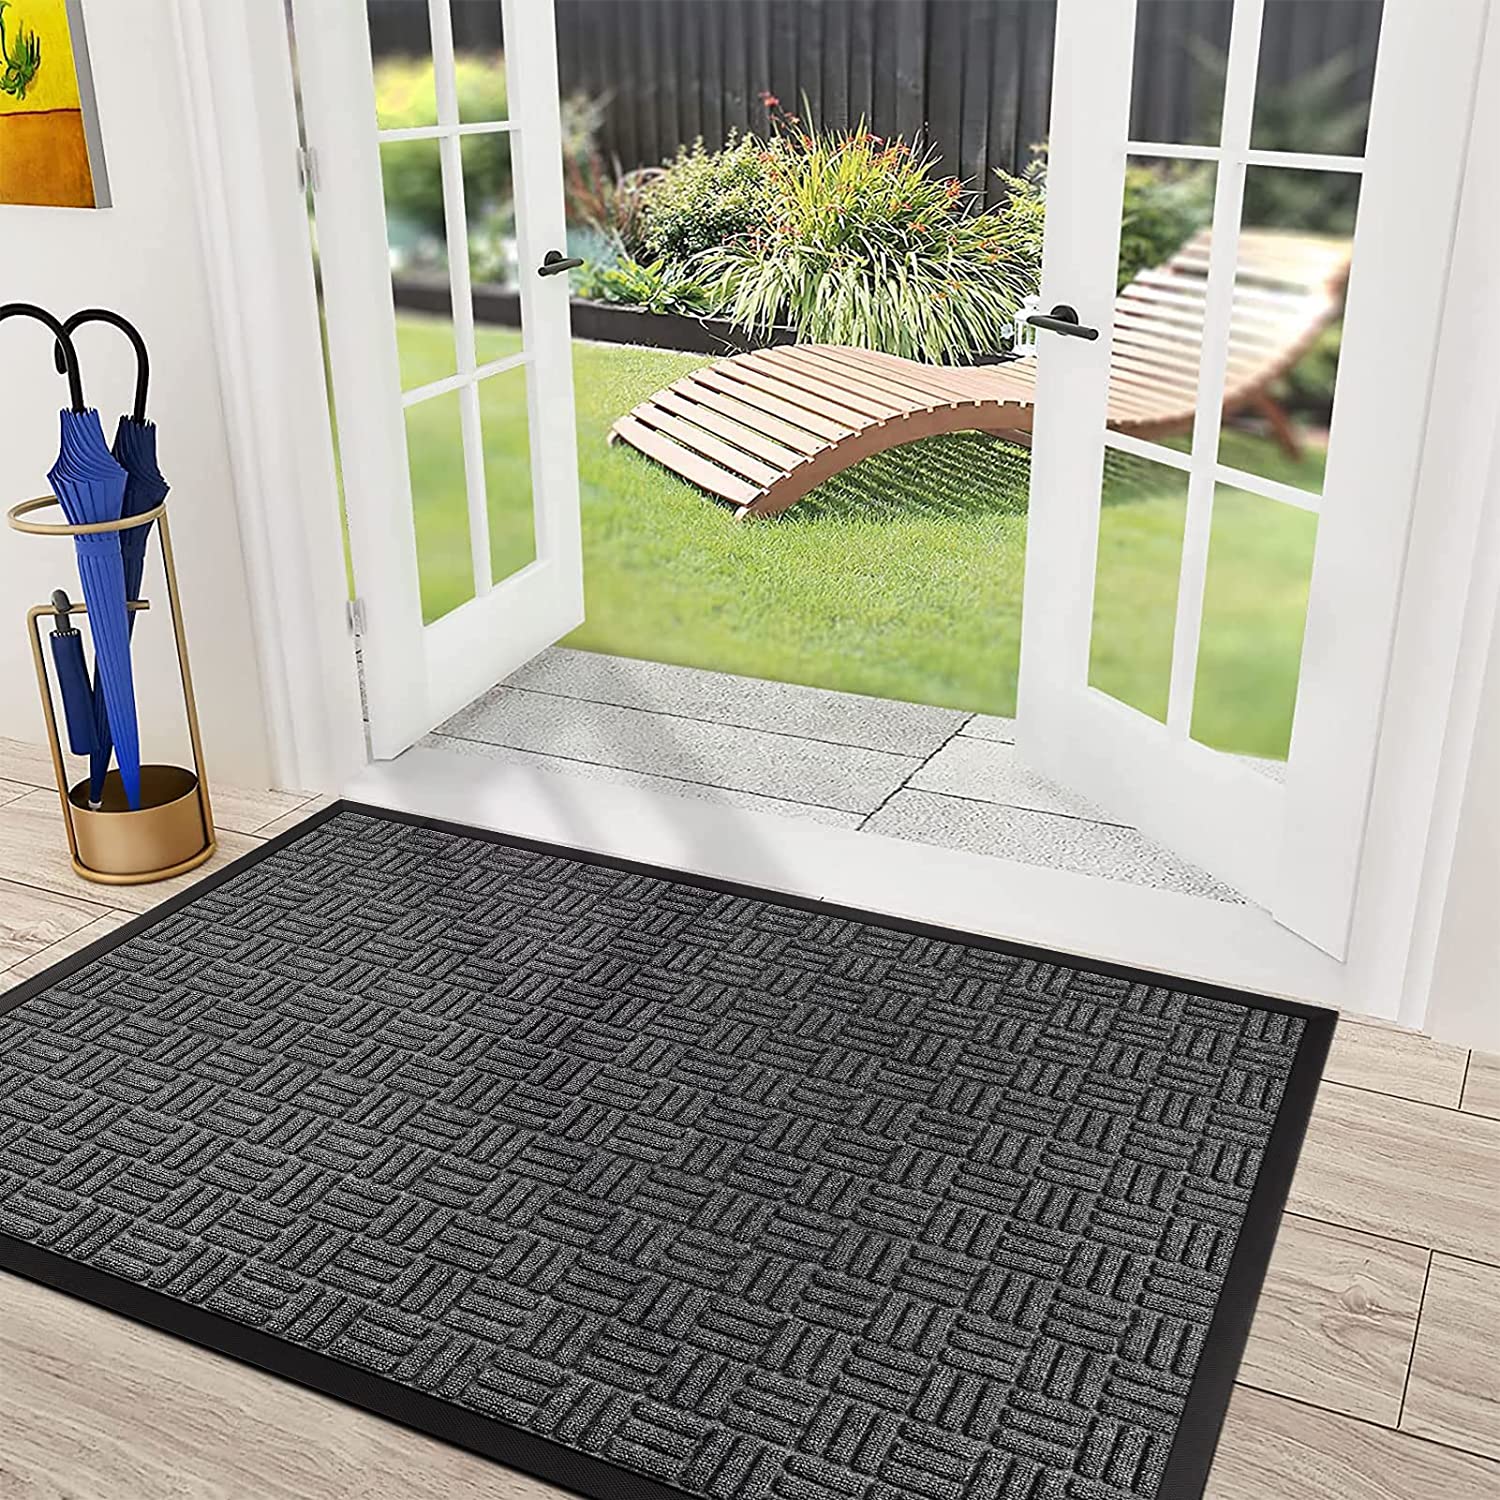 How much do you know about doormats?